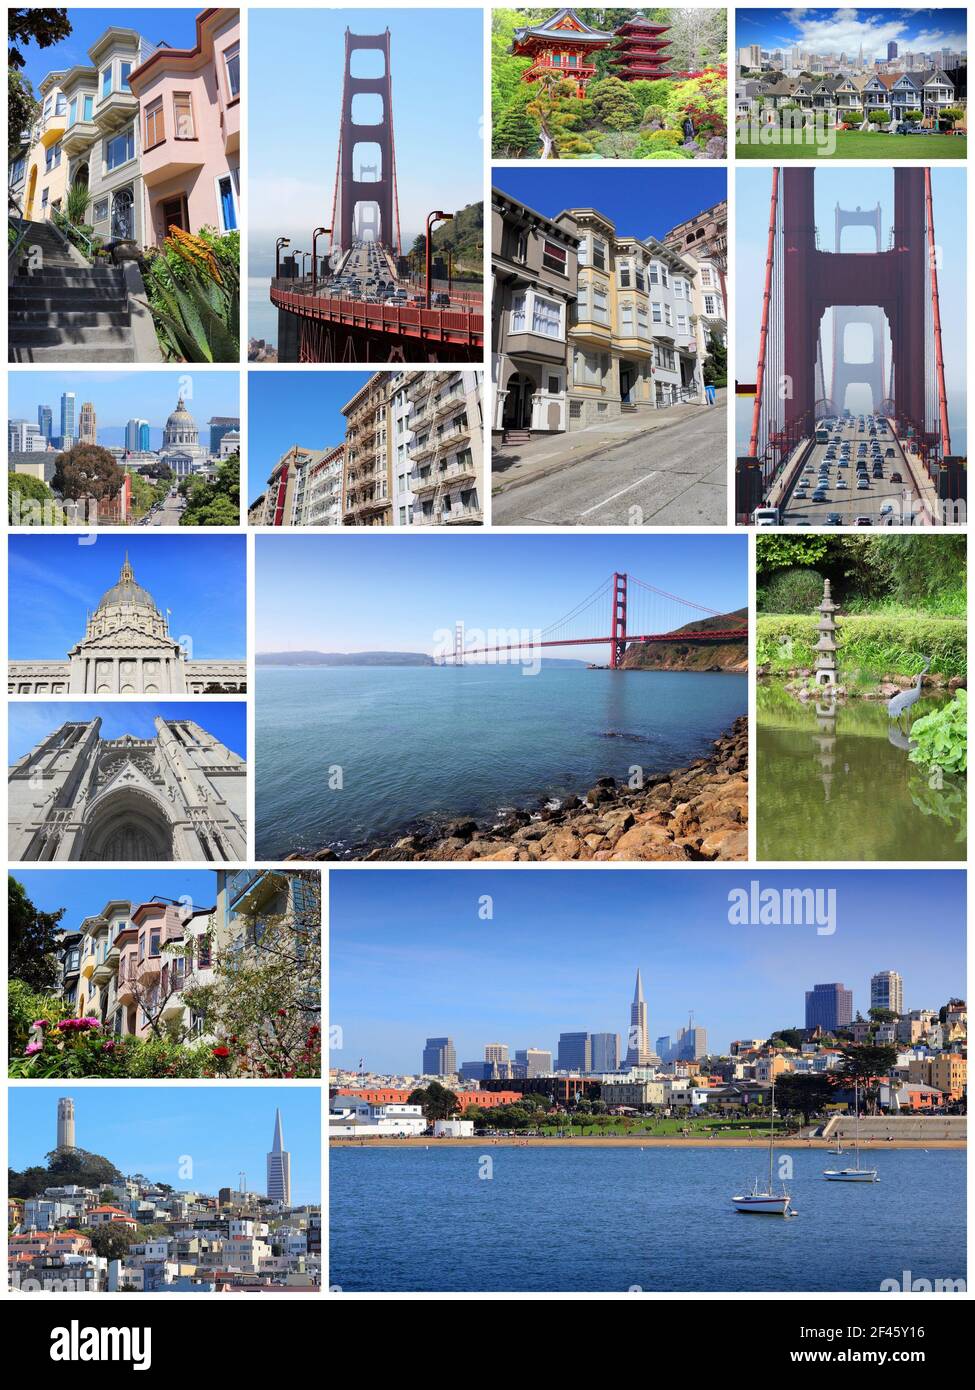 San Francisco collage - photo collection with Alamo Square, Nob Hill, Telegraph Hill, Grace Cathedral and Golden Gate Bridge. Stock Photo